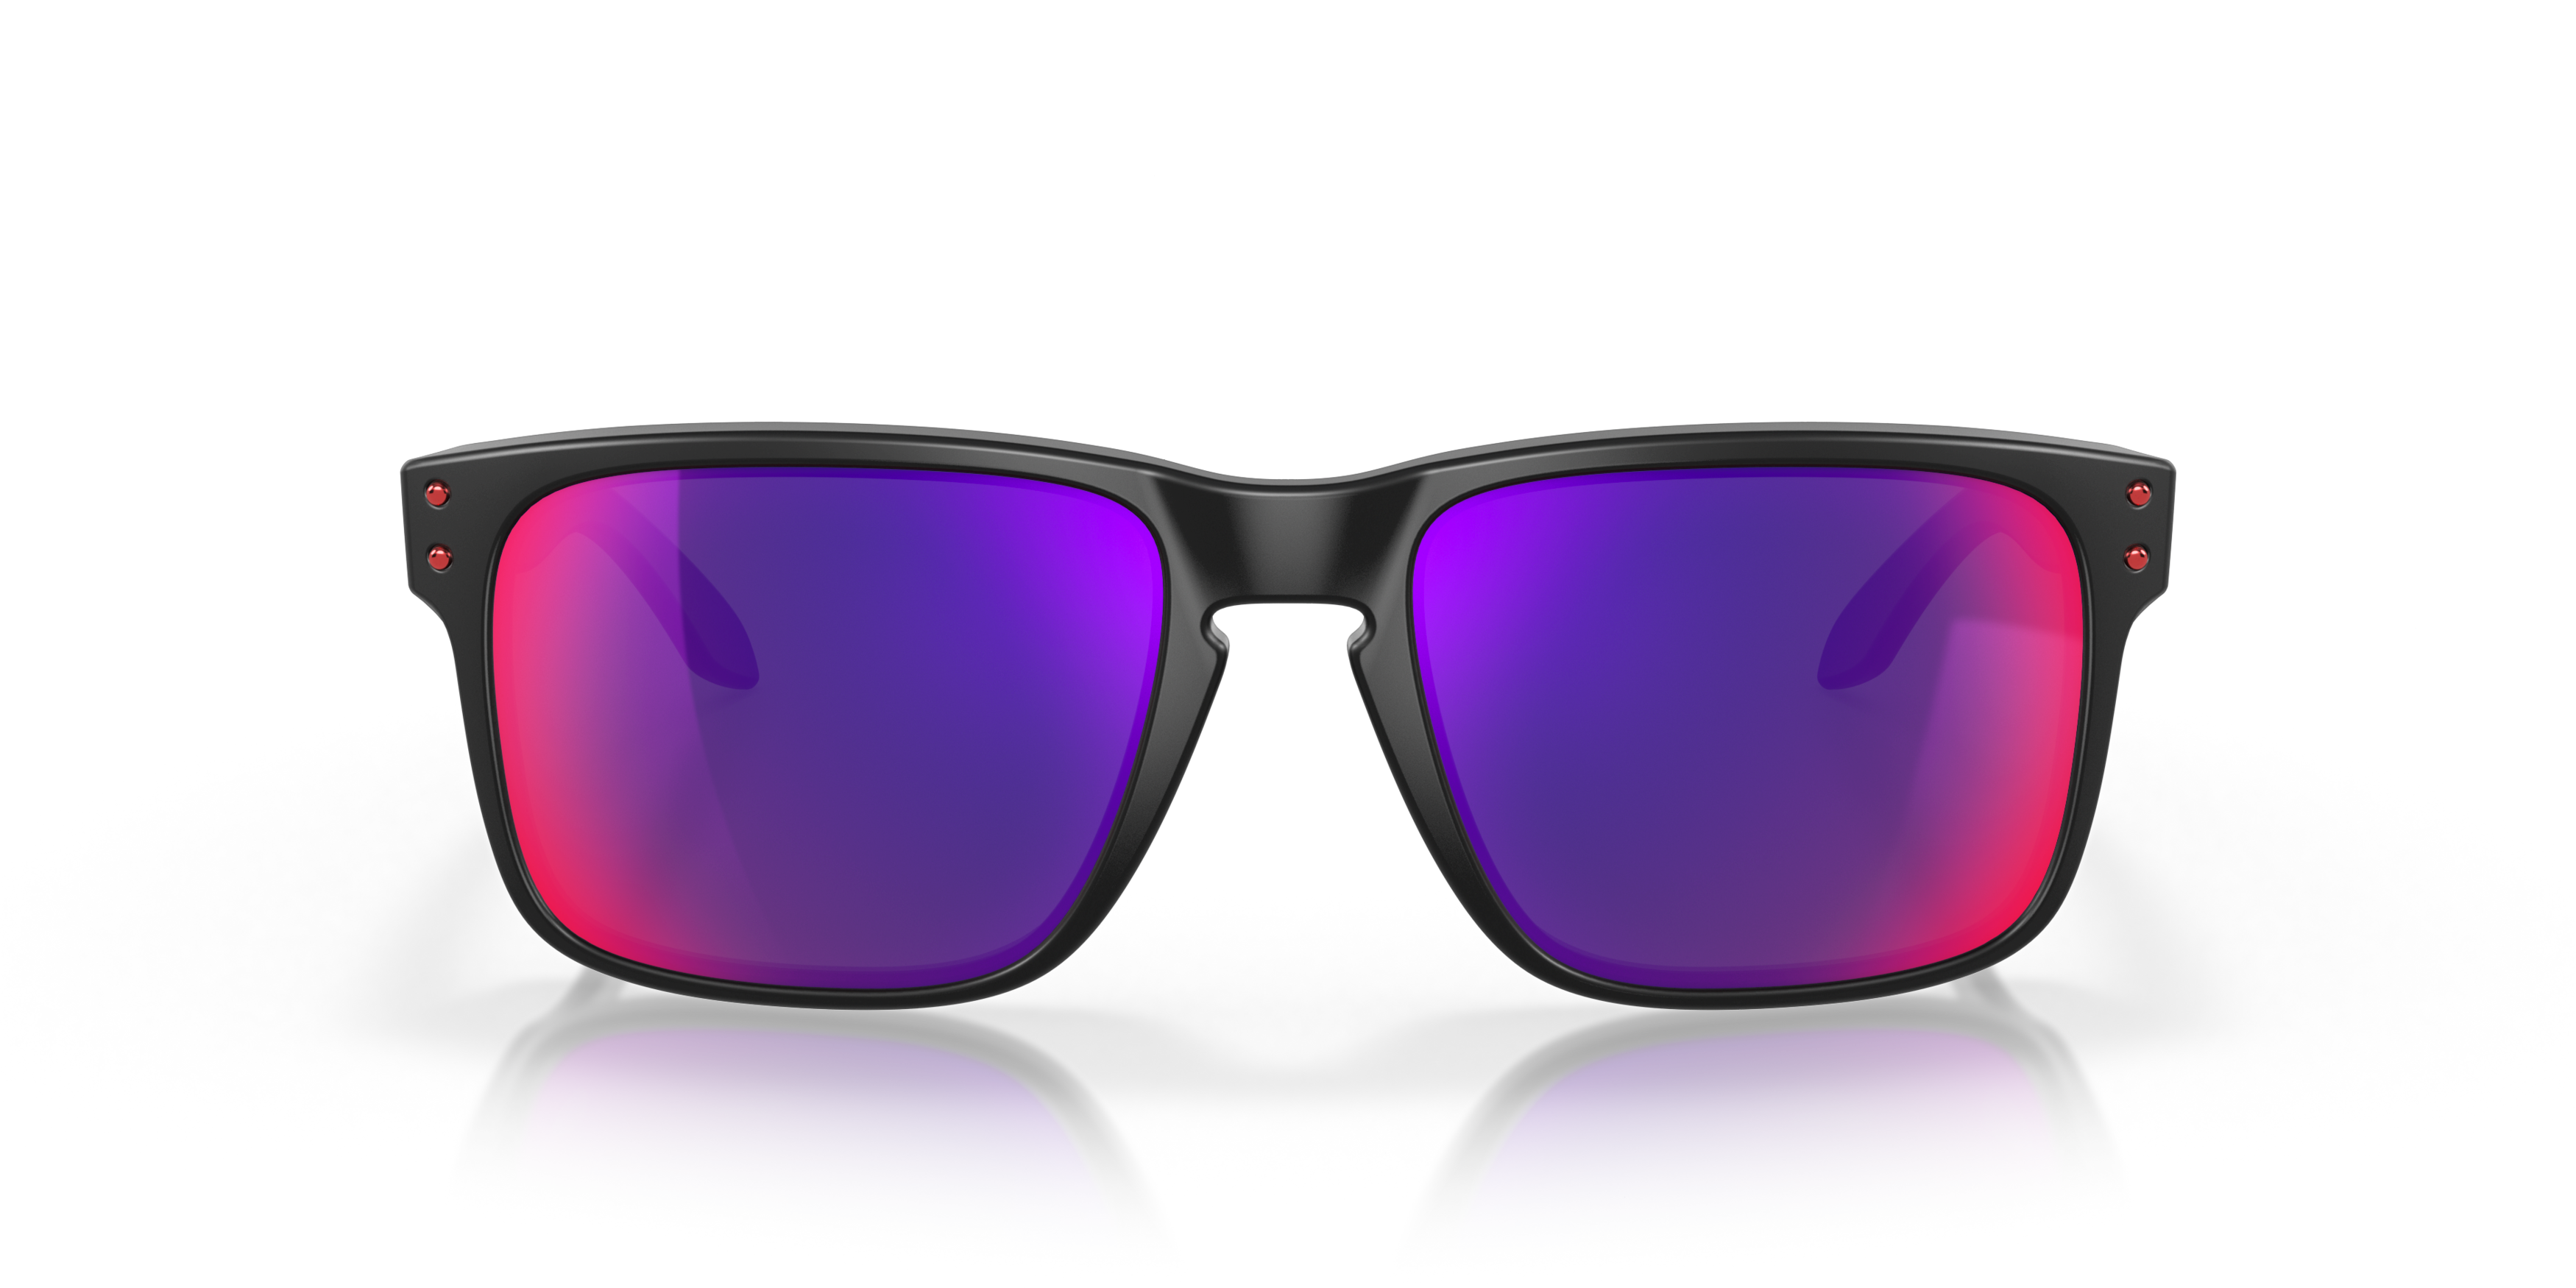 [products.image.front] Oakley 0OO9102 910236